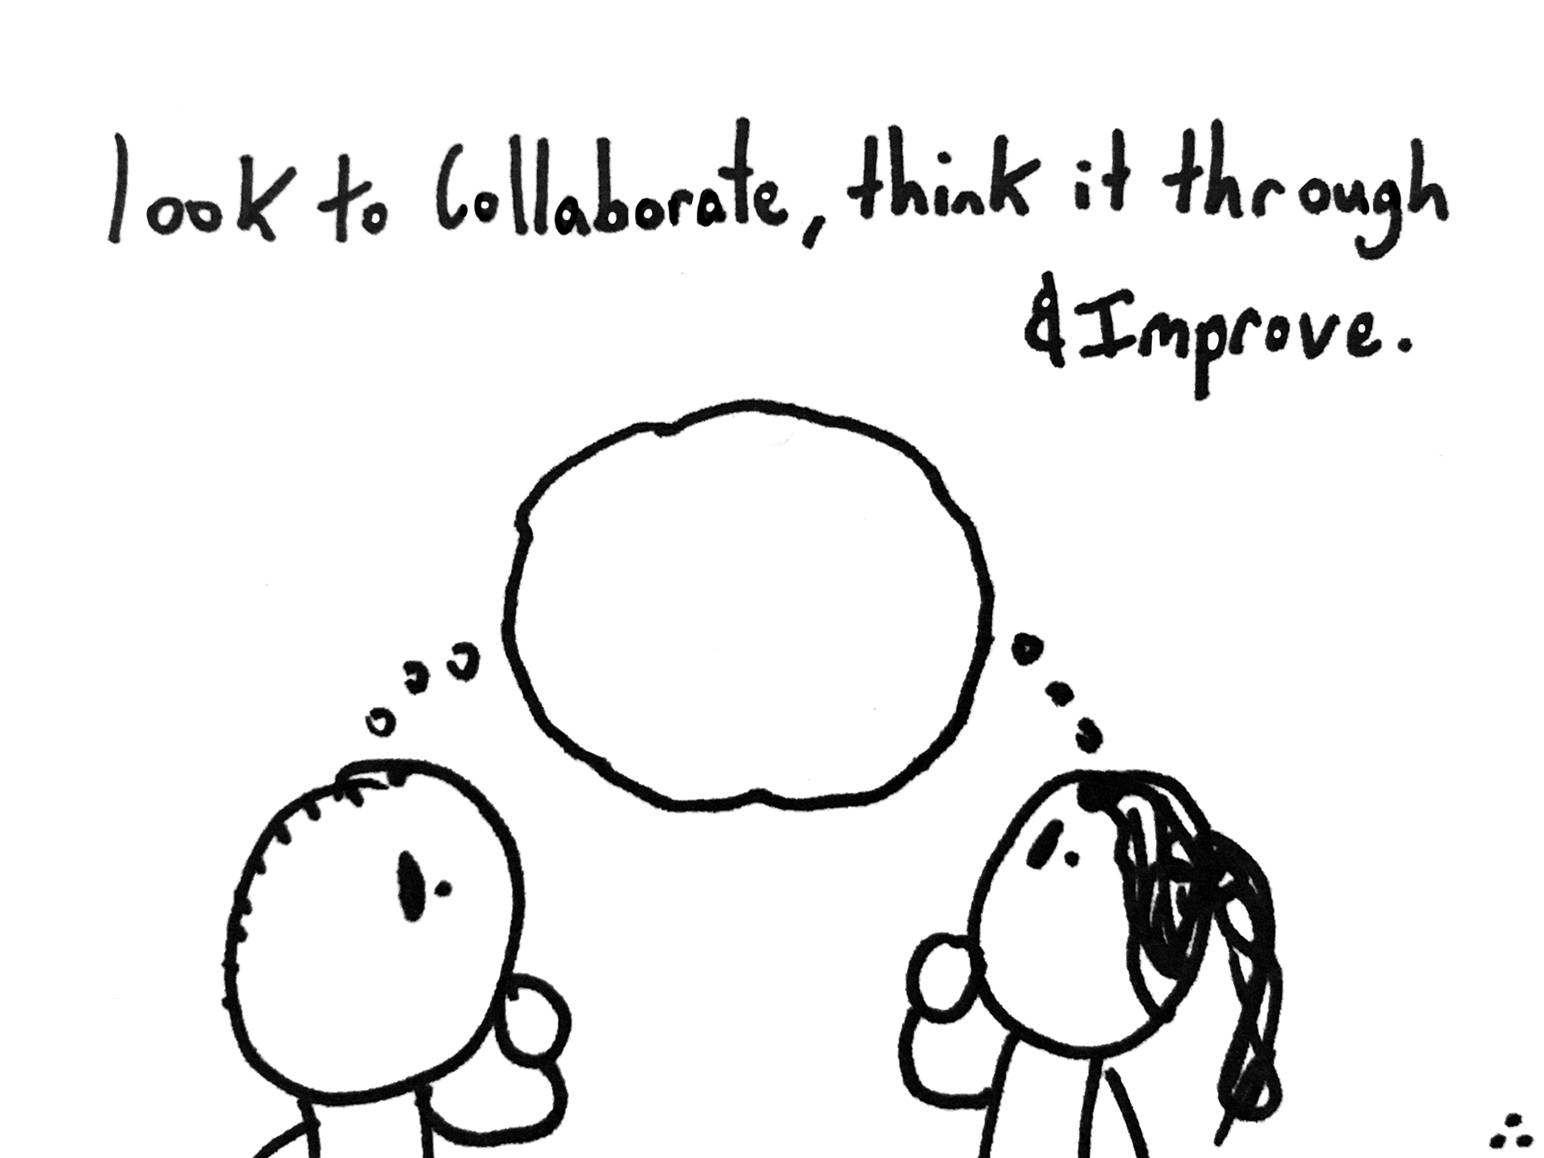 look to collaborate with them to think it through and improve.